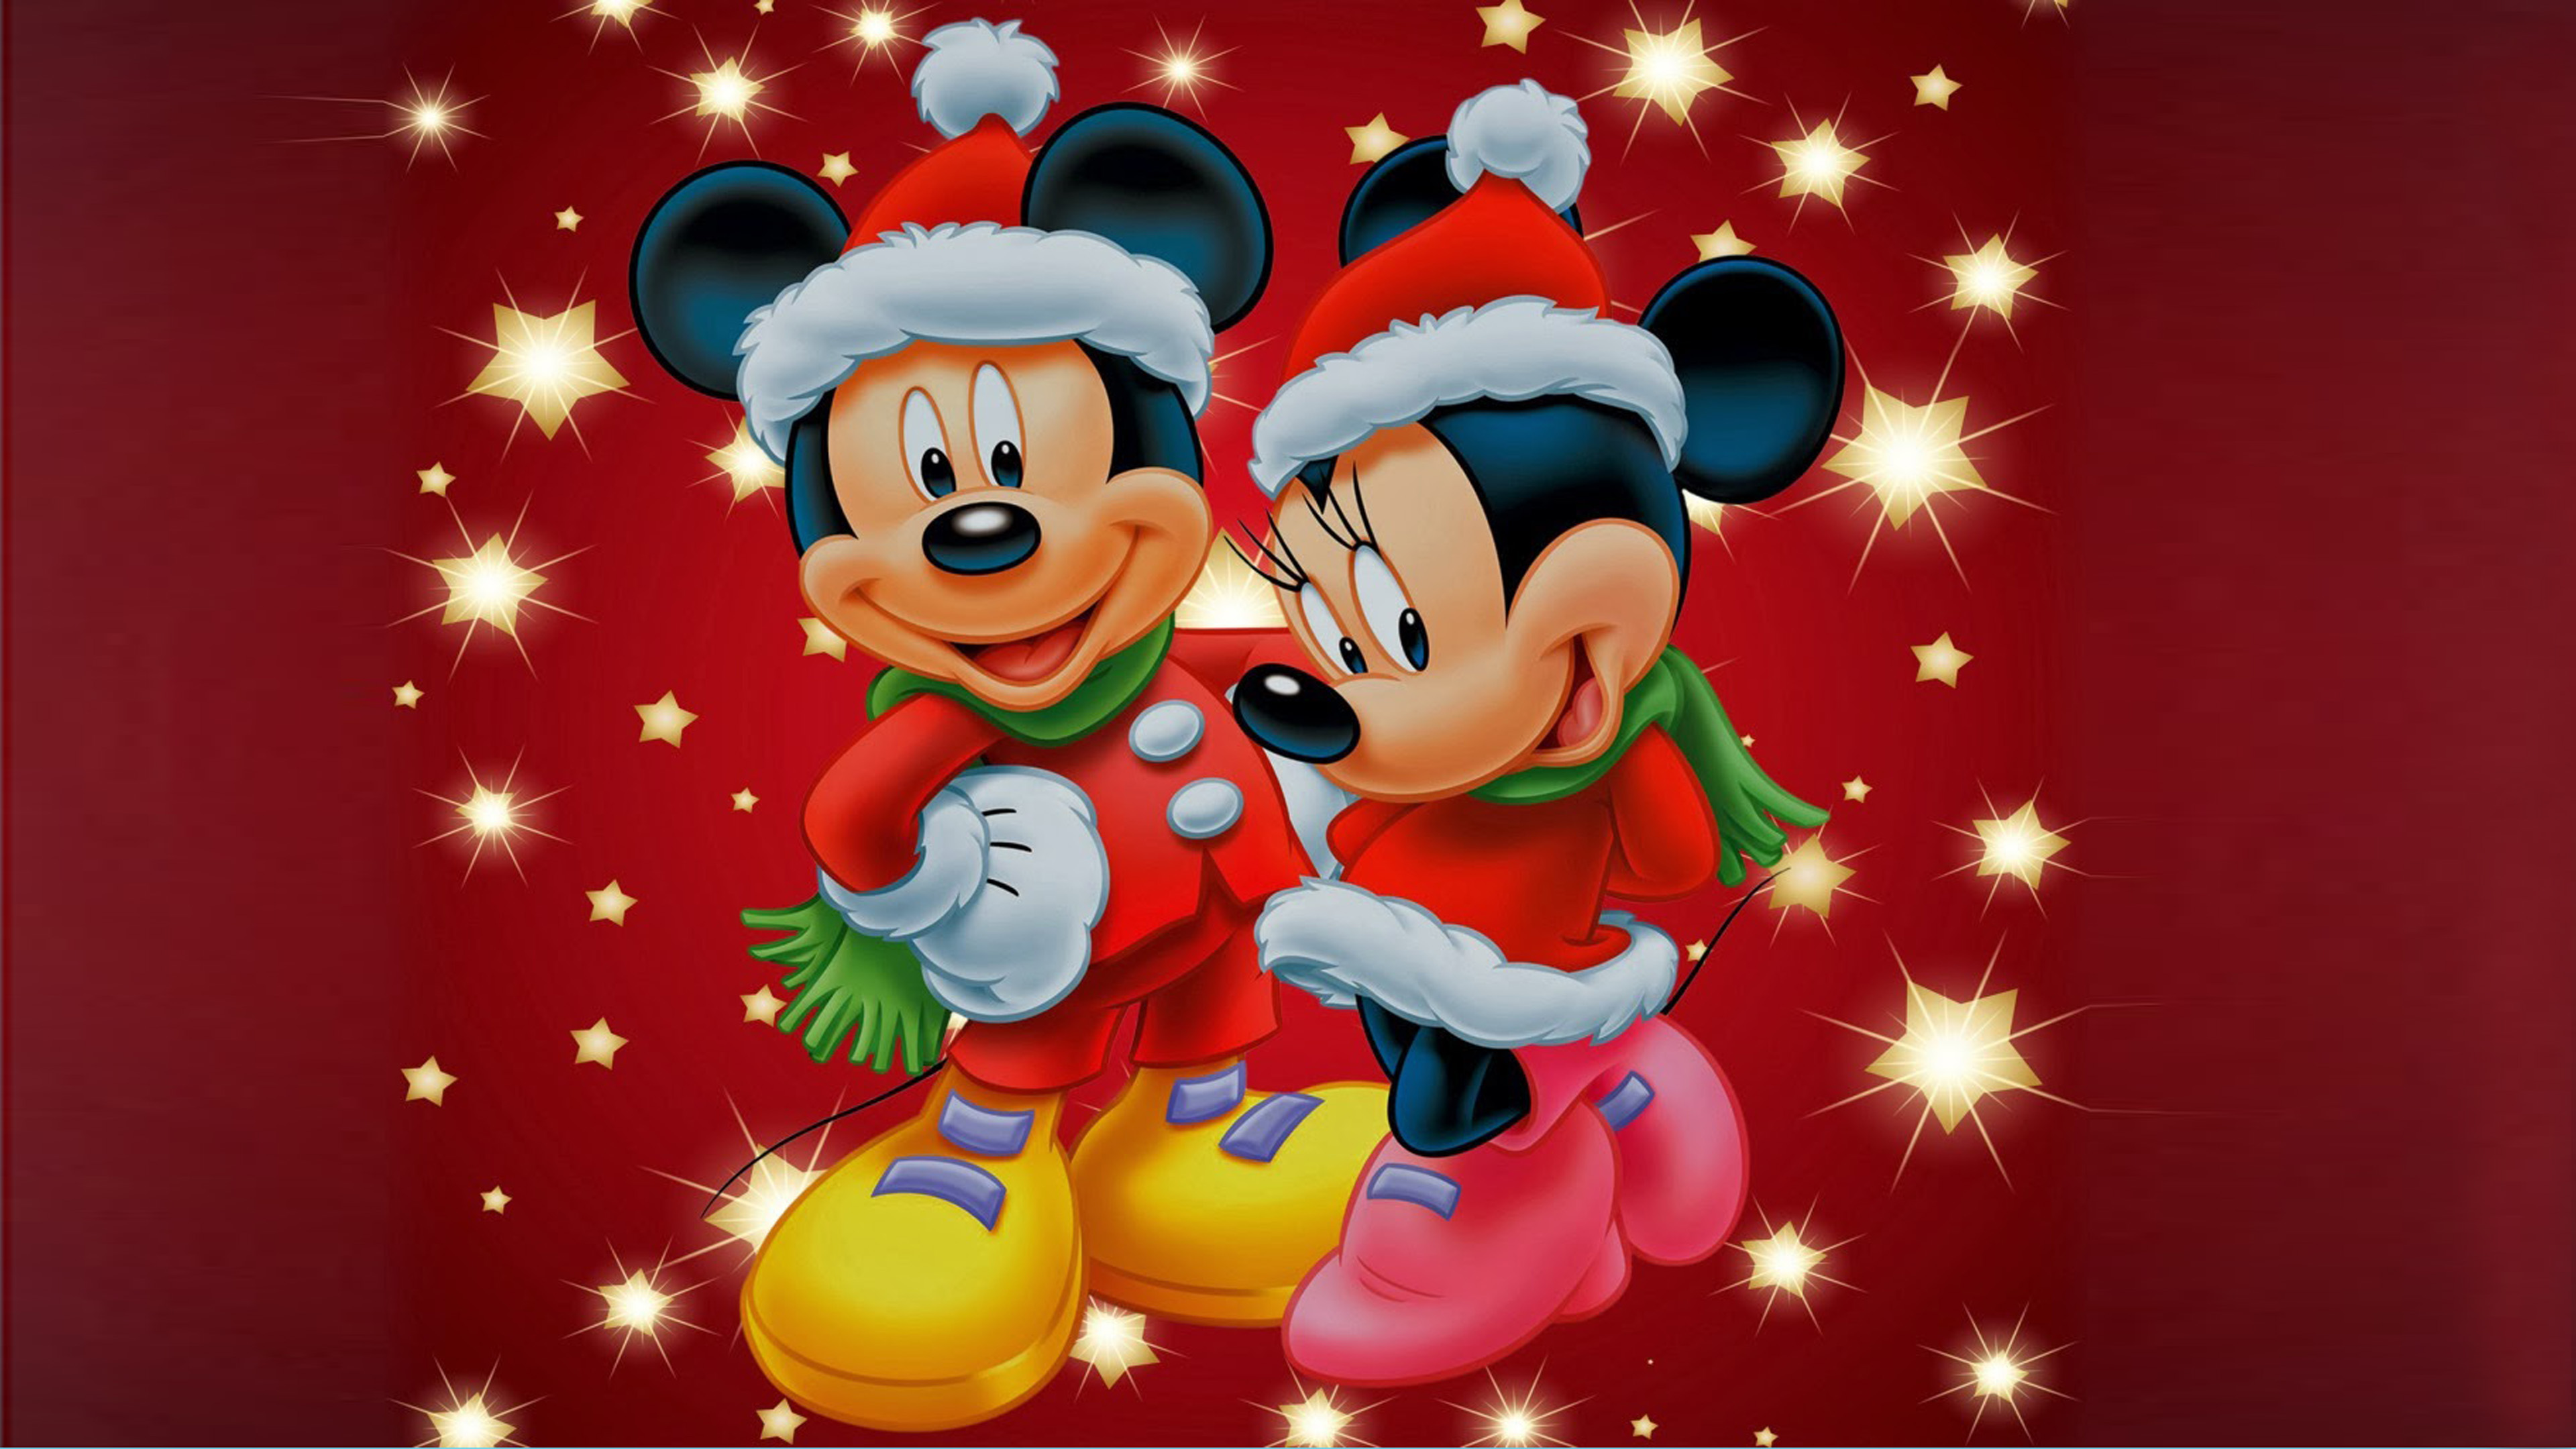 12+ Free wallpaper background red mickey minnie mouse christmas 2019